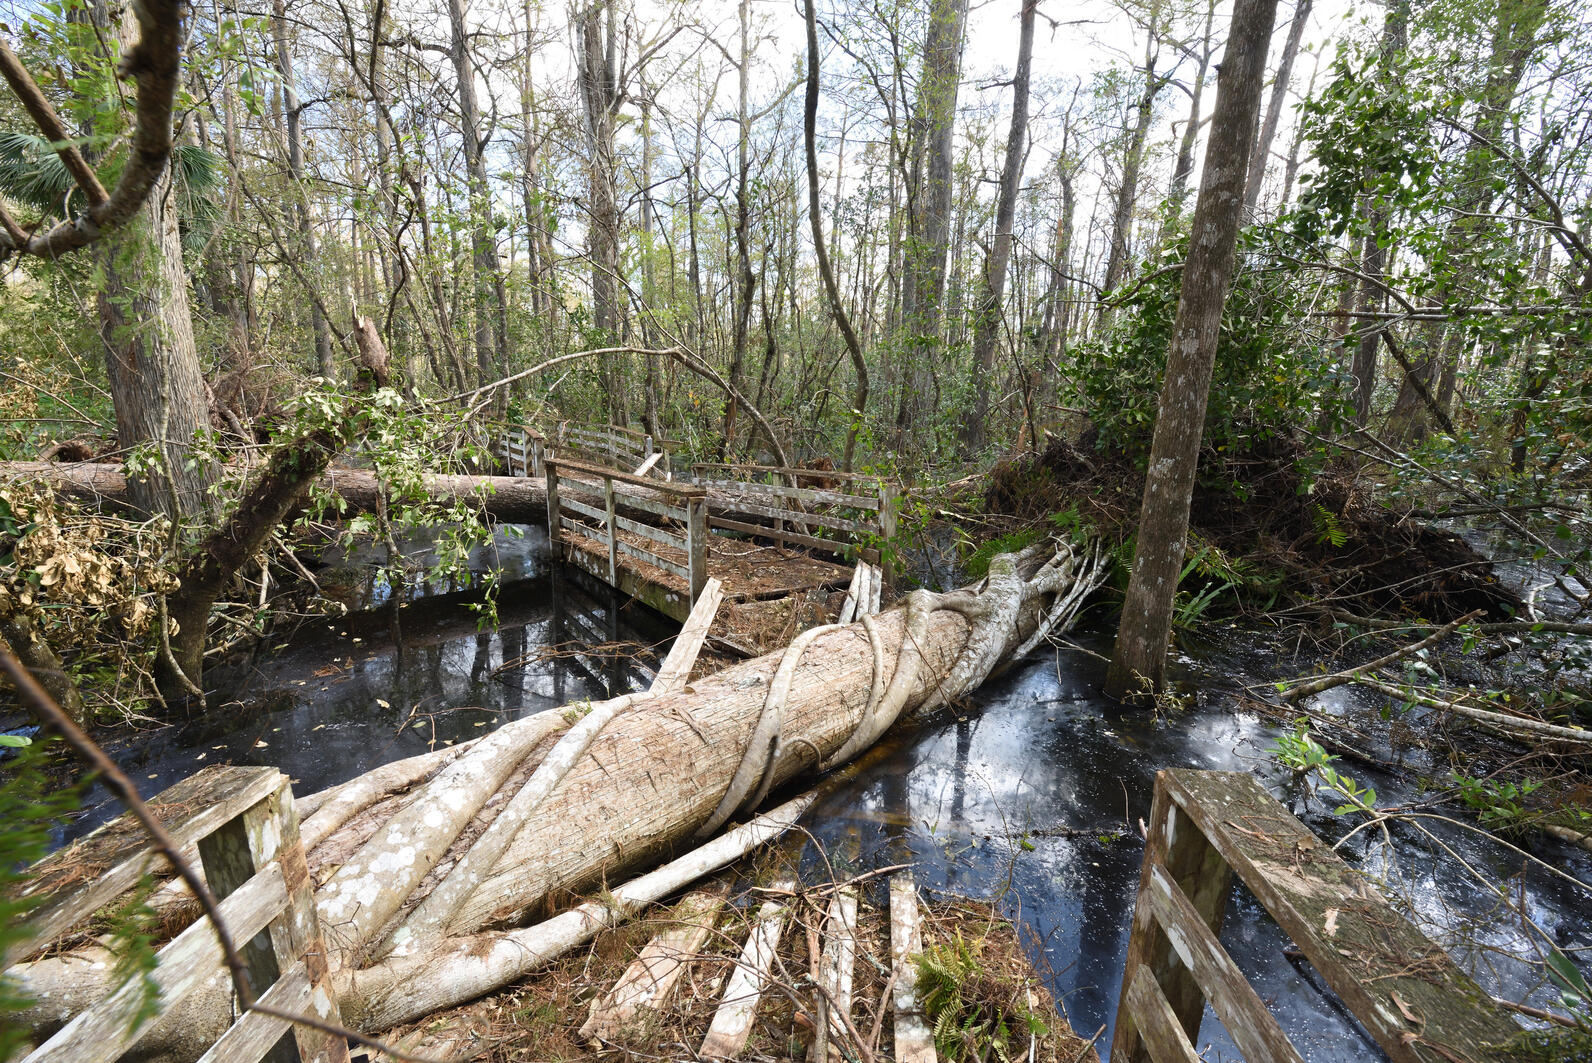 Photo shows the boardwalk smashed by a giant tree